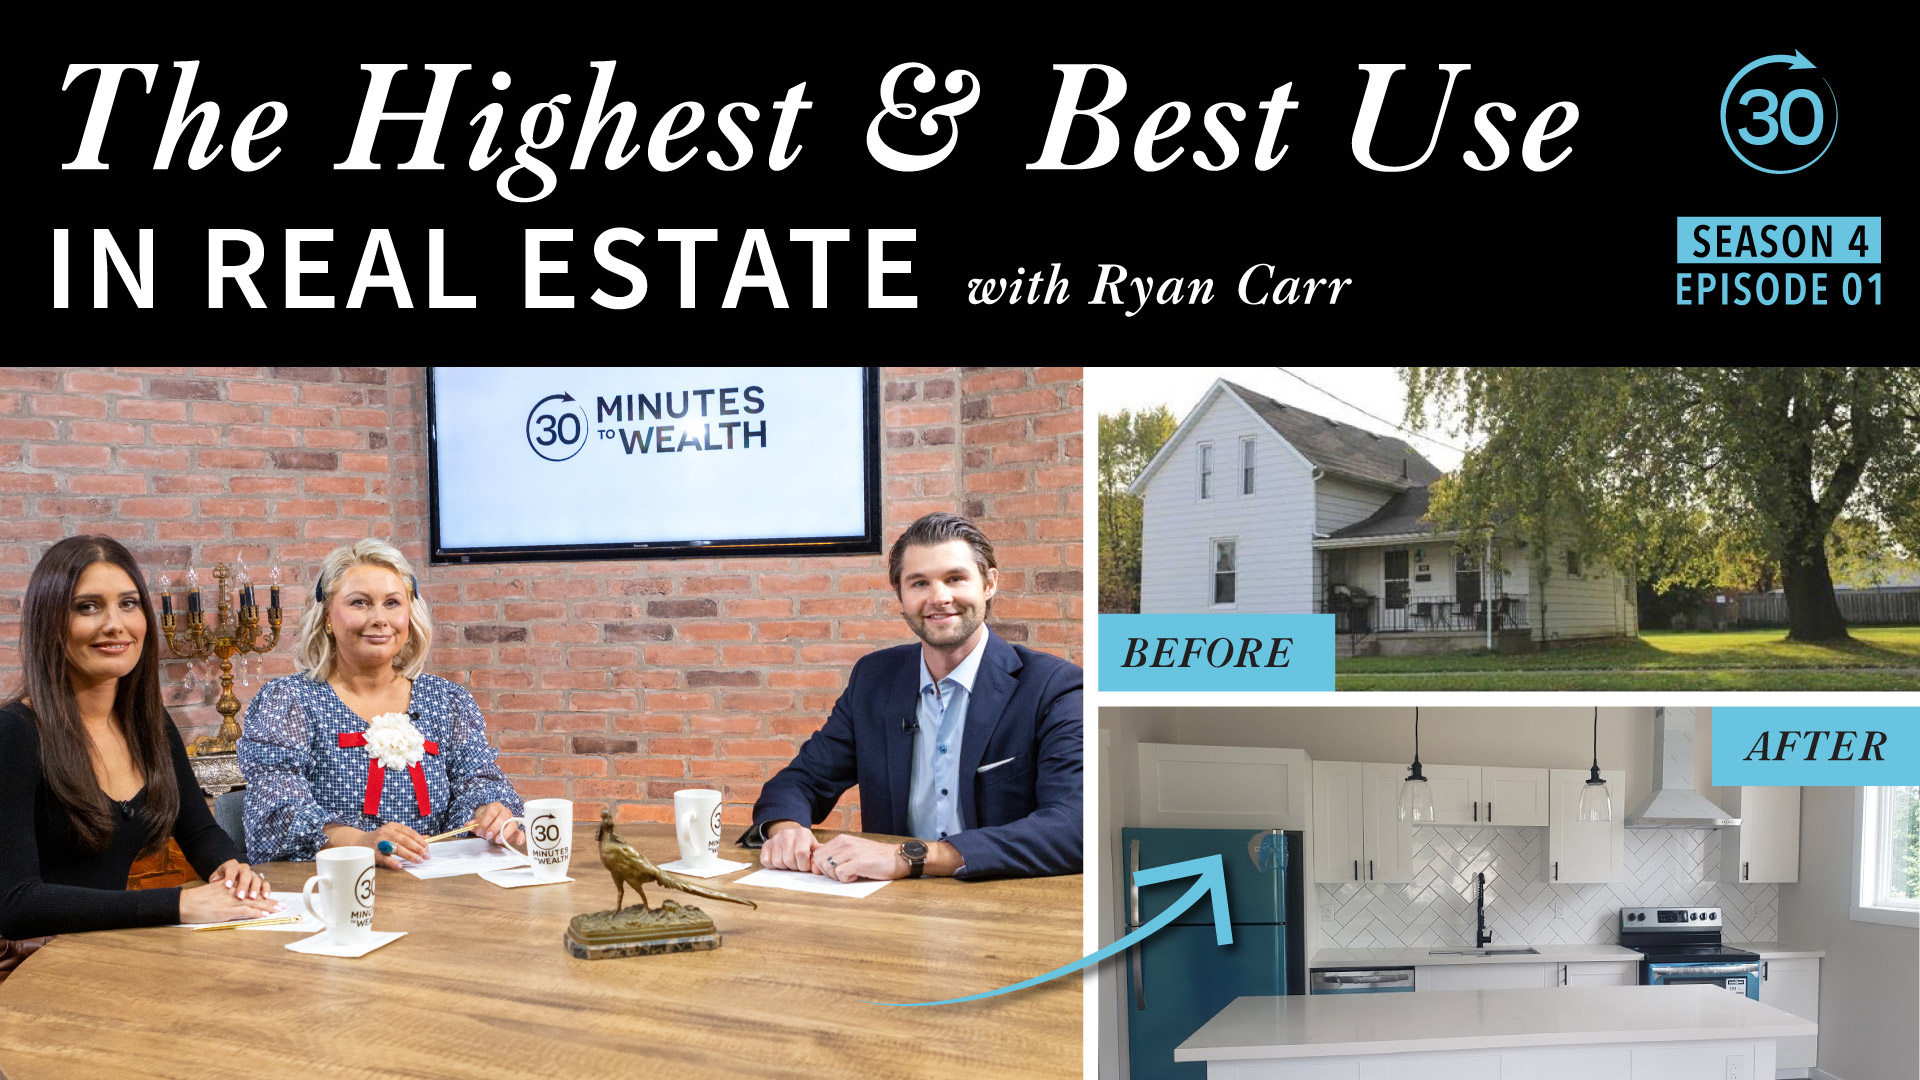 S4 E1 – The Highest & Best Use in Real Estate